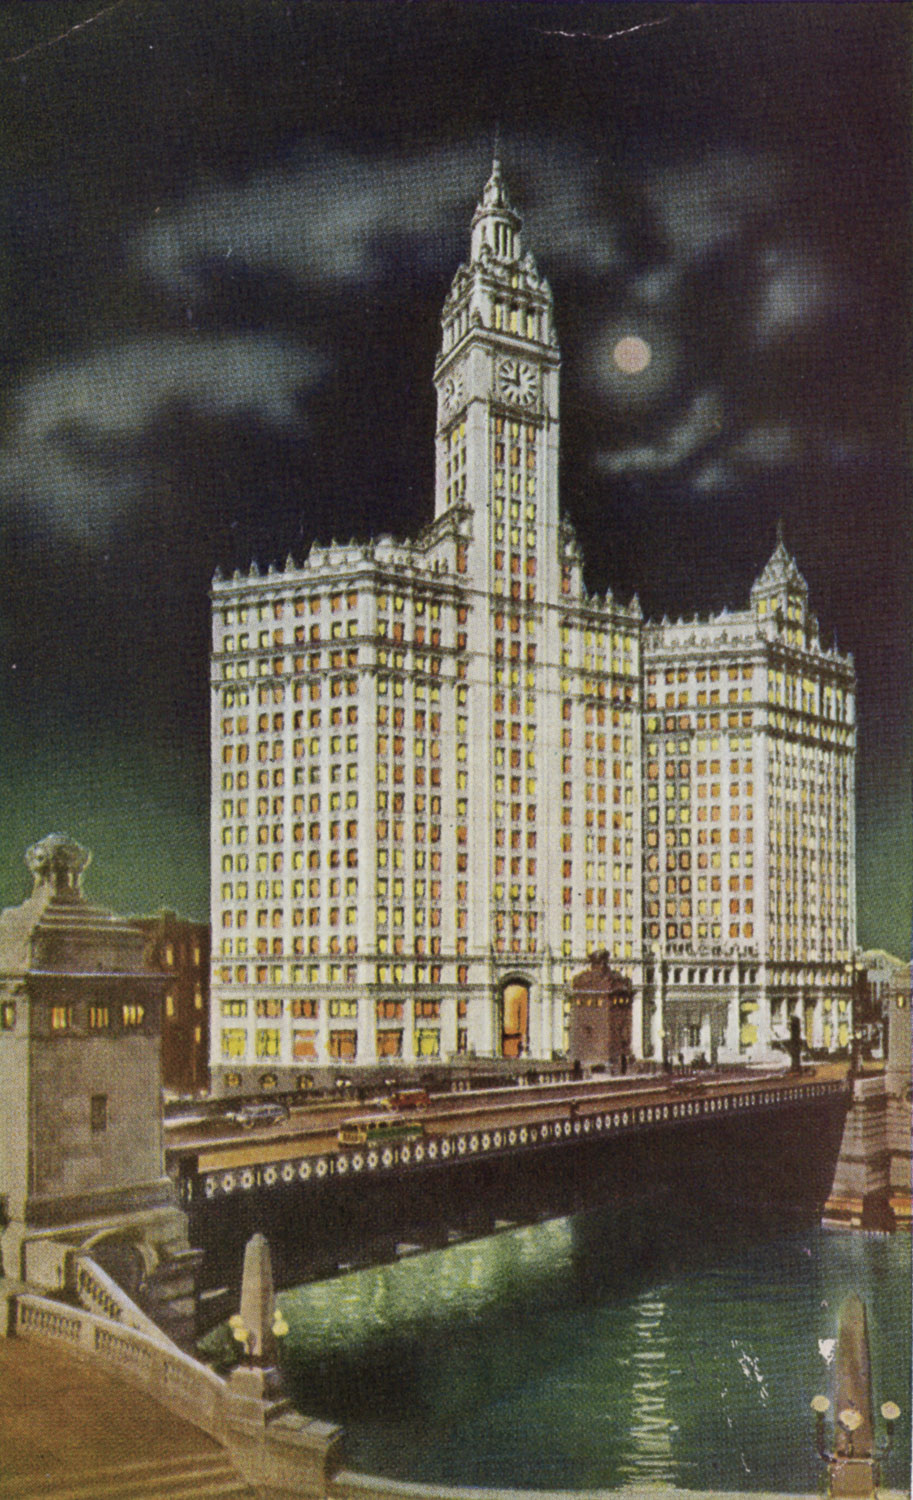 A color image of the Wrigley Building at night. The stark white building rises up from behind a bridge over a river. All of its windows are illuminated from the interior and glow orange or yellow. The upper portions of the building have classical details. In the center is a large square tower with a clock. A white full moon shines through the clouds.